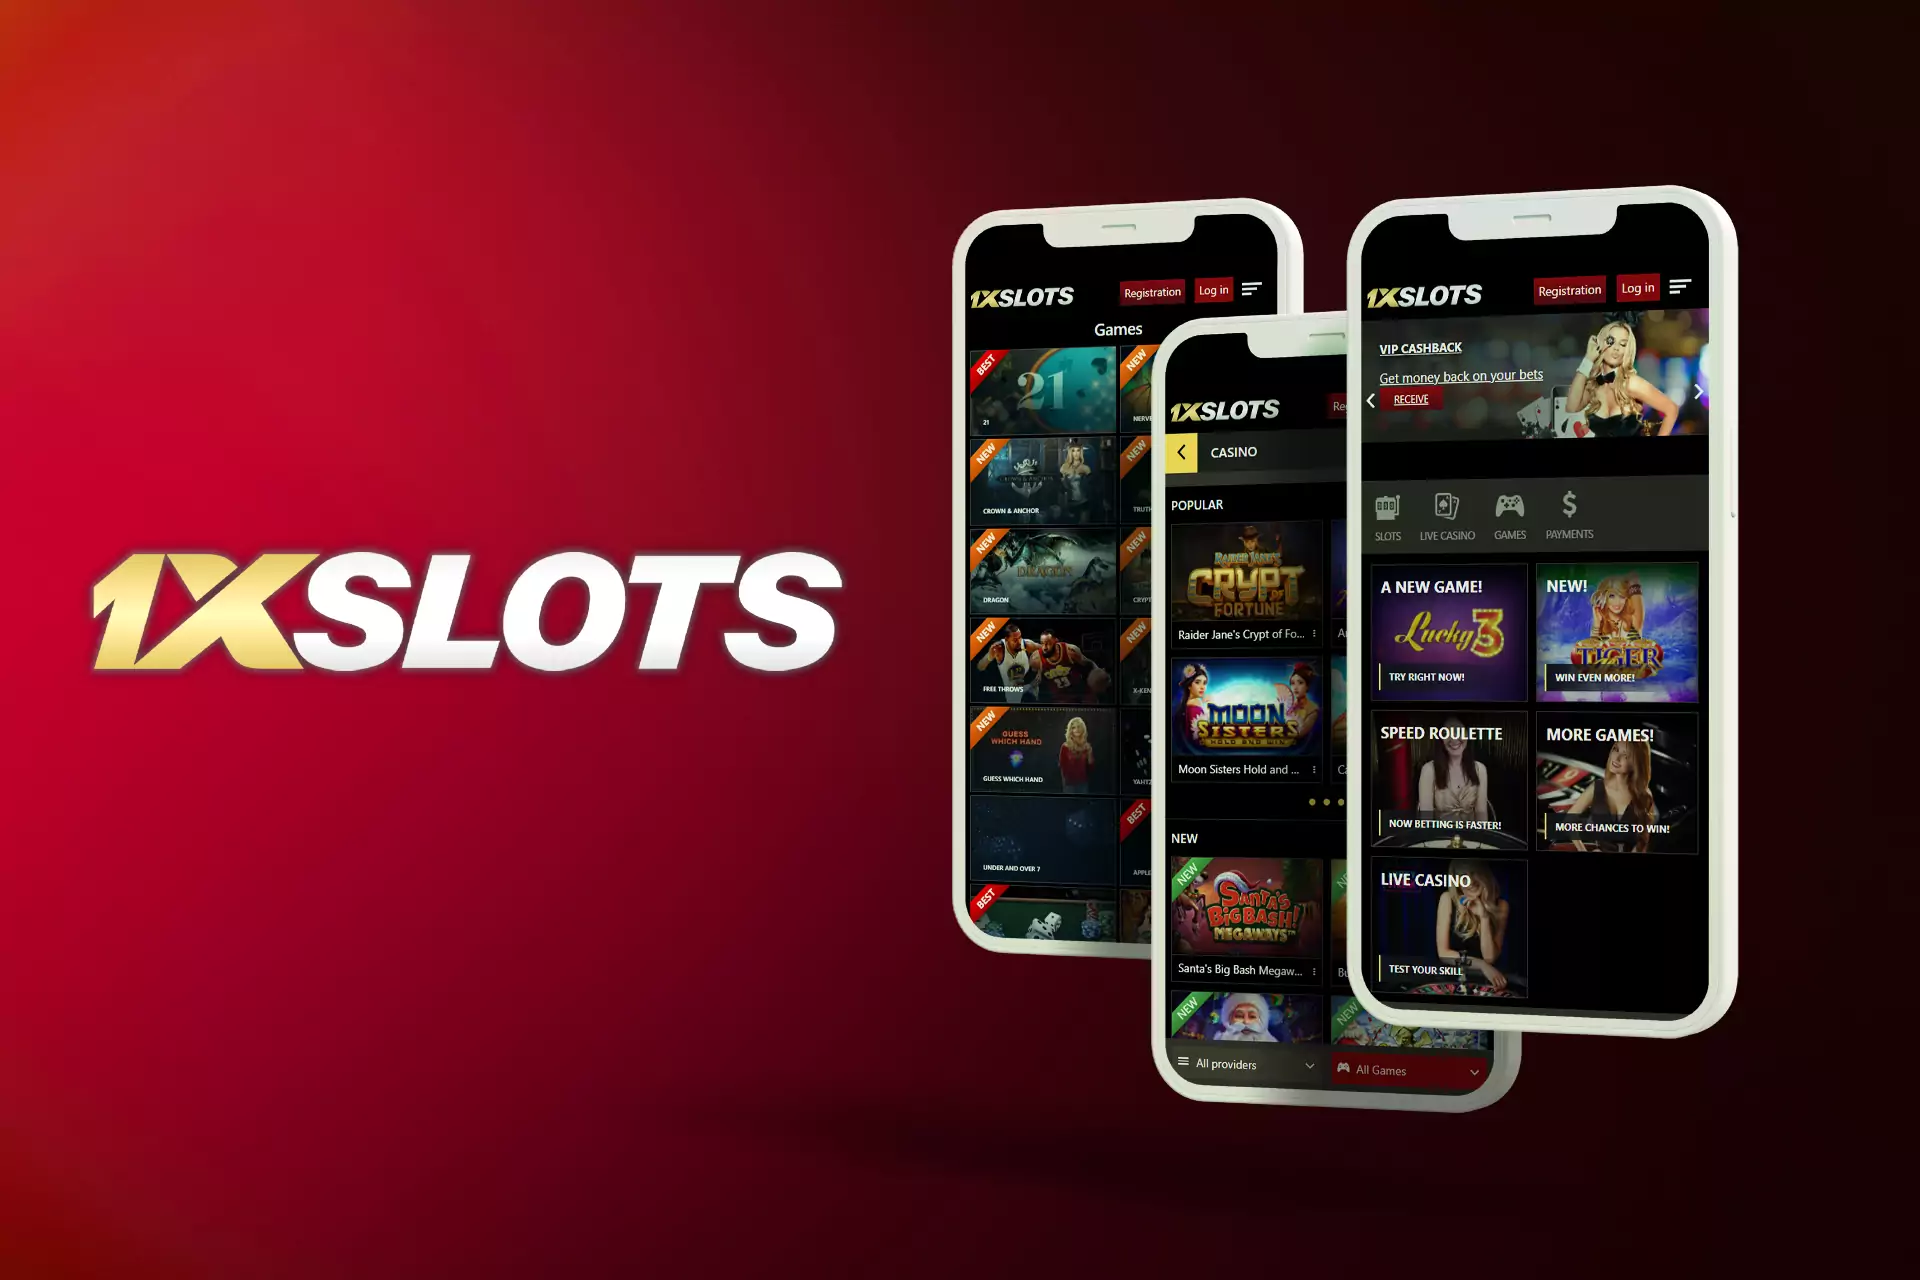 At the 1xSlots you find lots of slot machines and amazing bonus offers for new and old users.